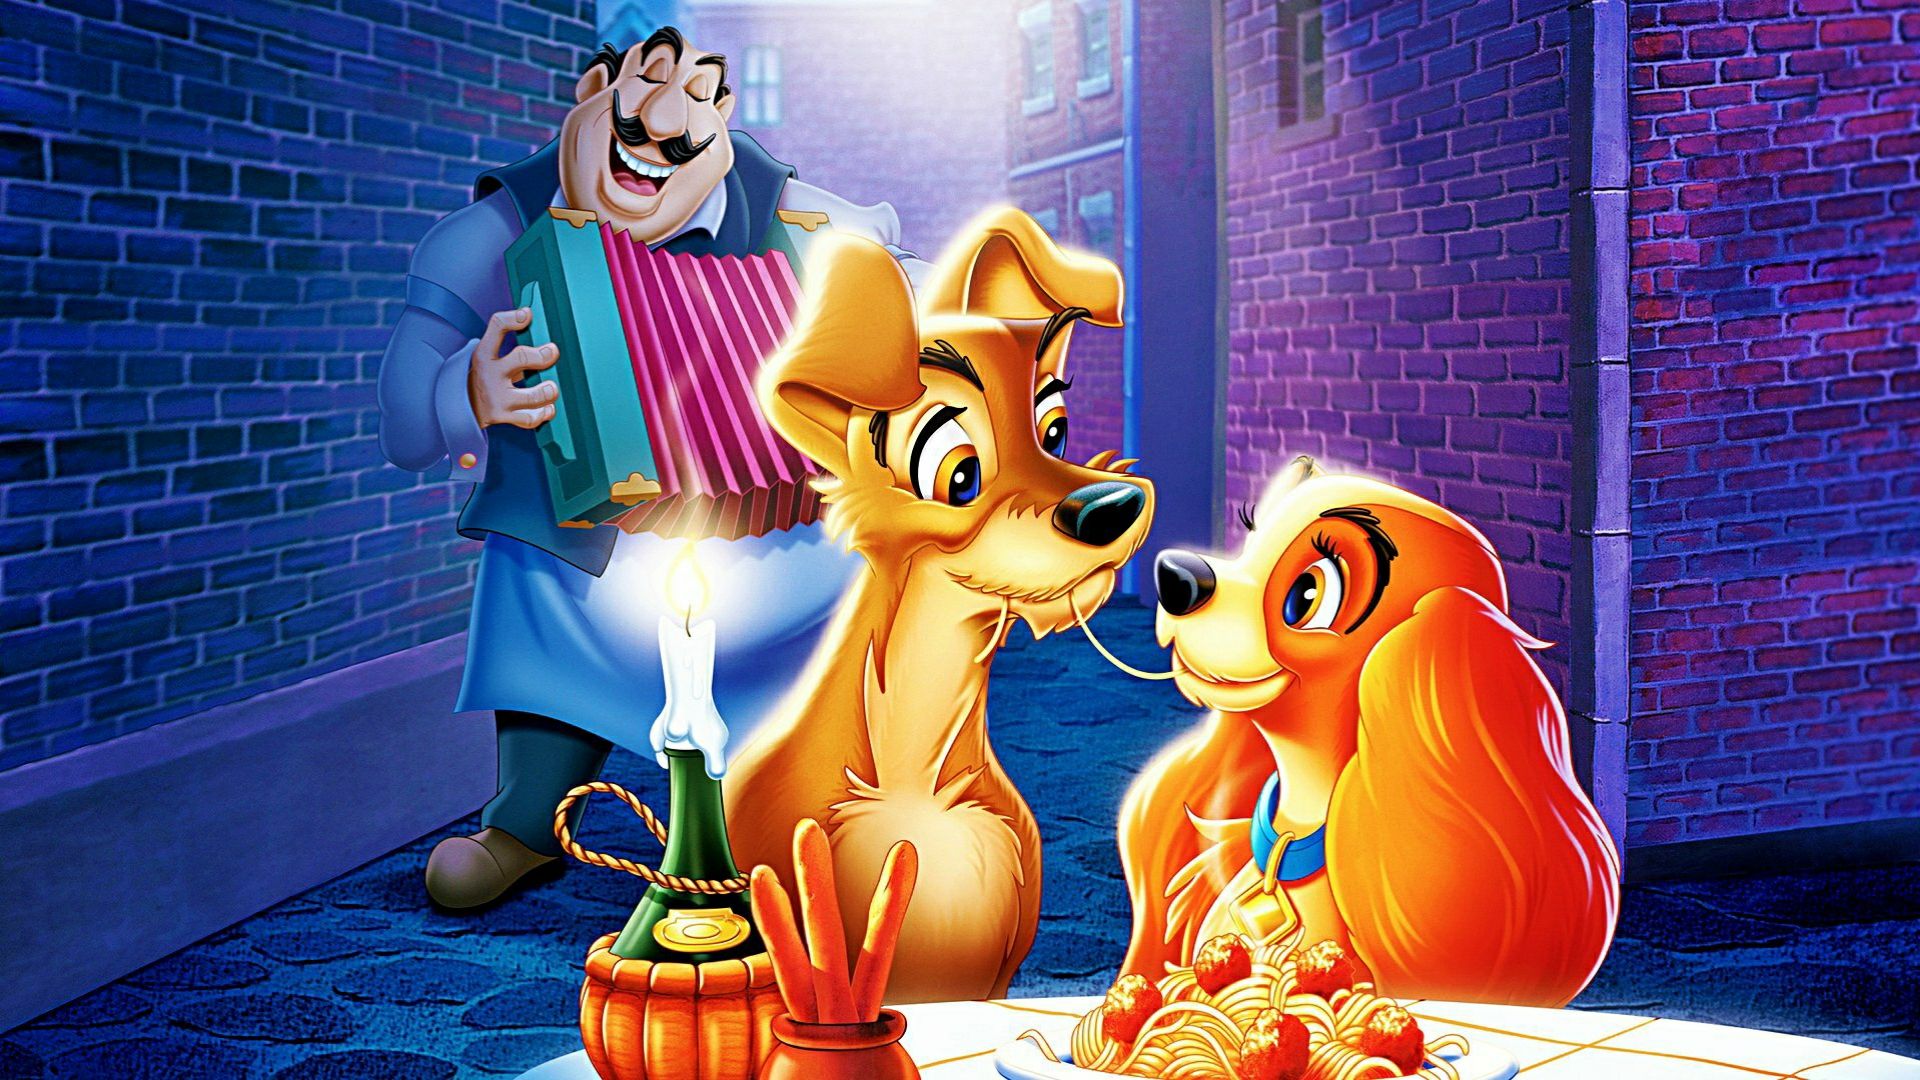 Mobile HD Wallpaper Lady And The Tramp 